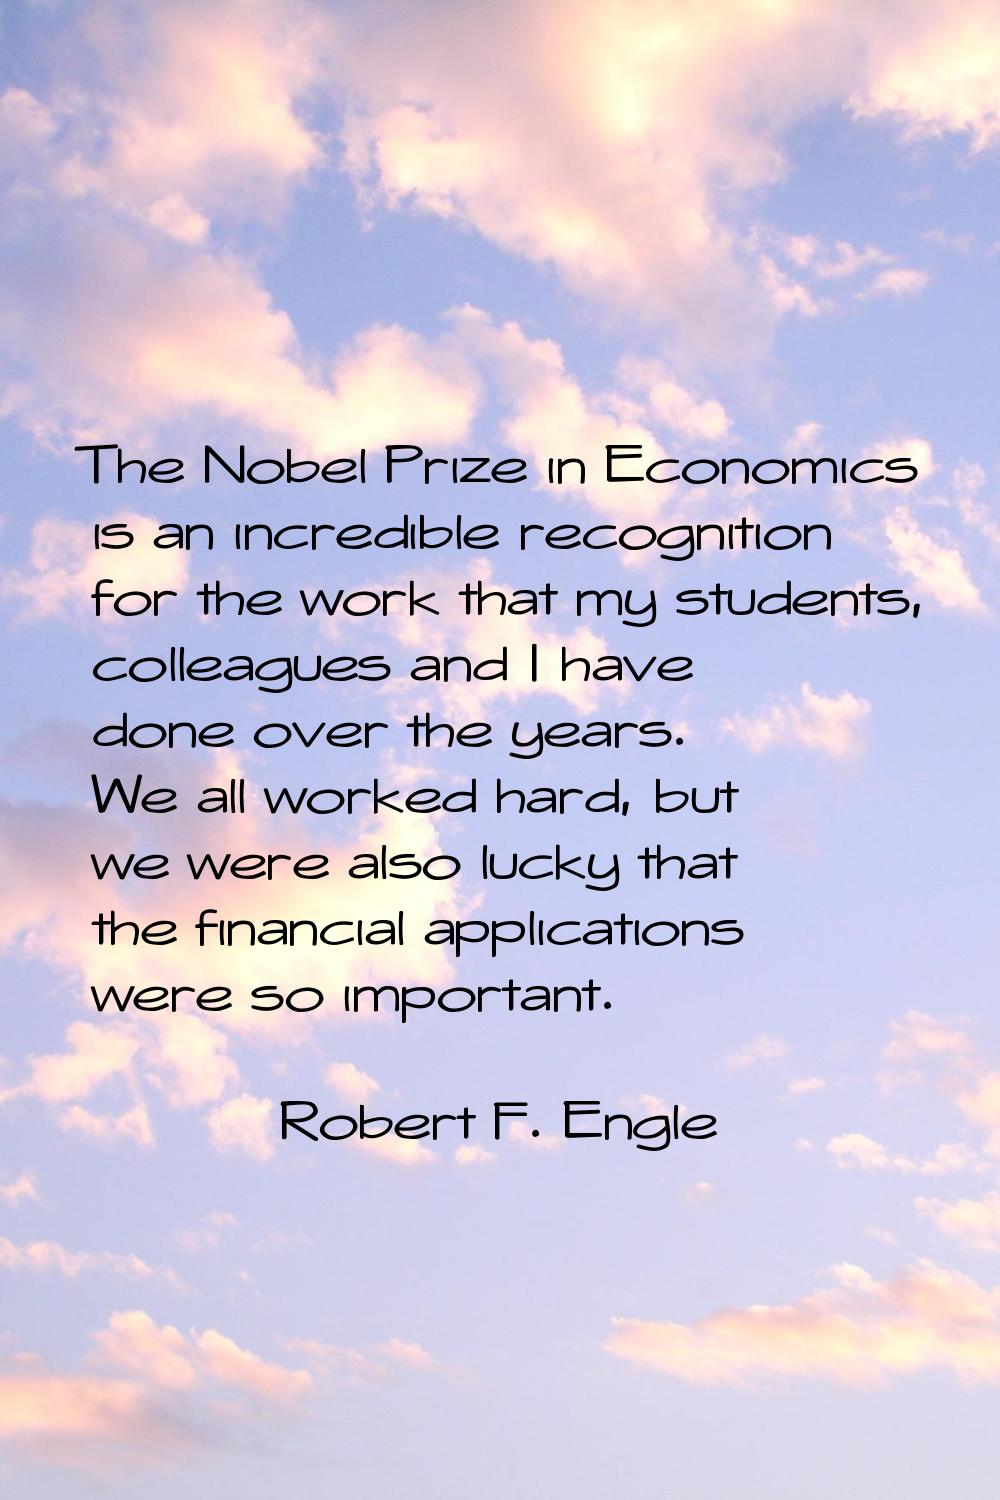 The Nobel Prize in Economics is an incredible recognition for the work that my students, colleagues